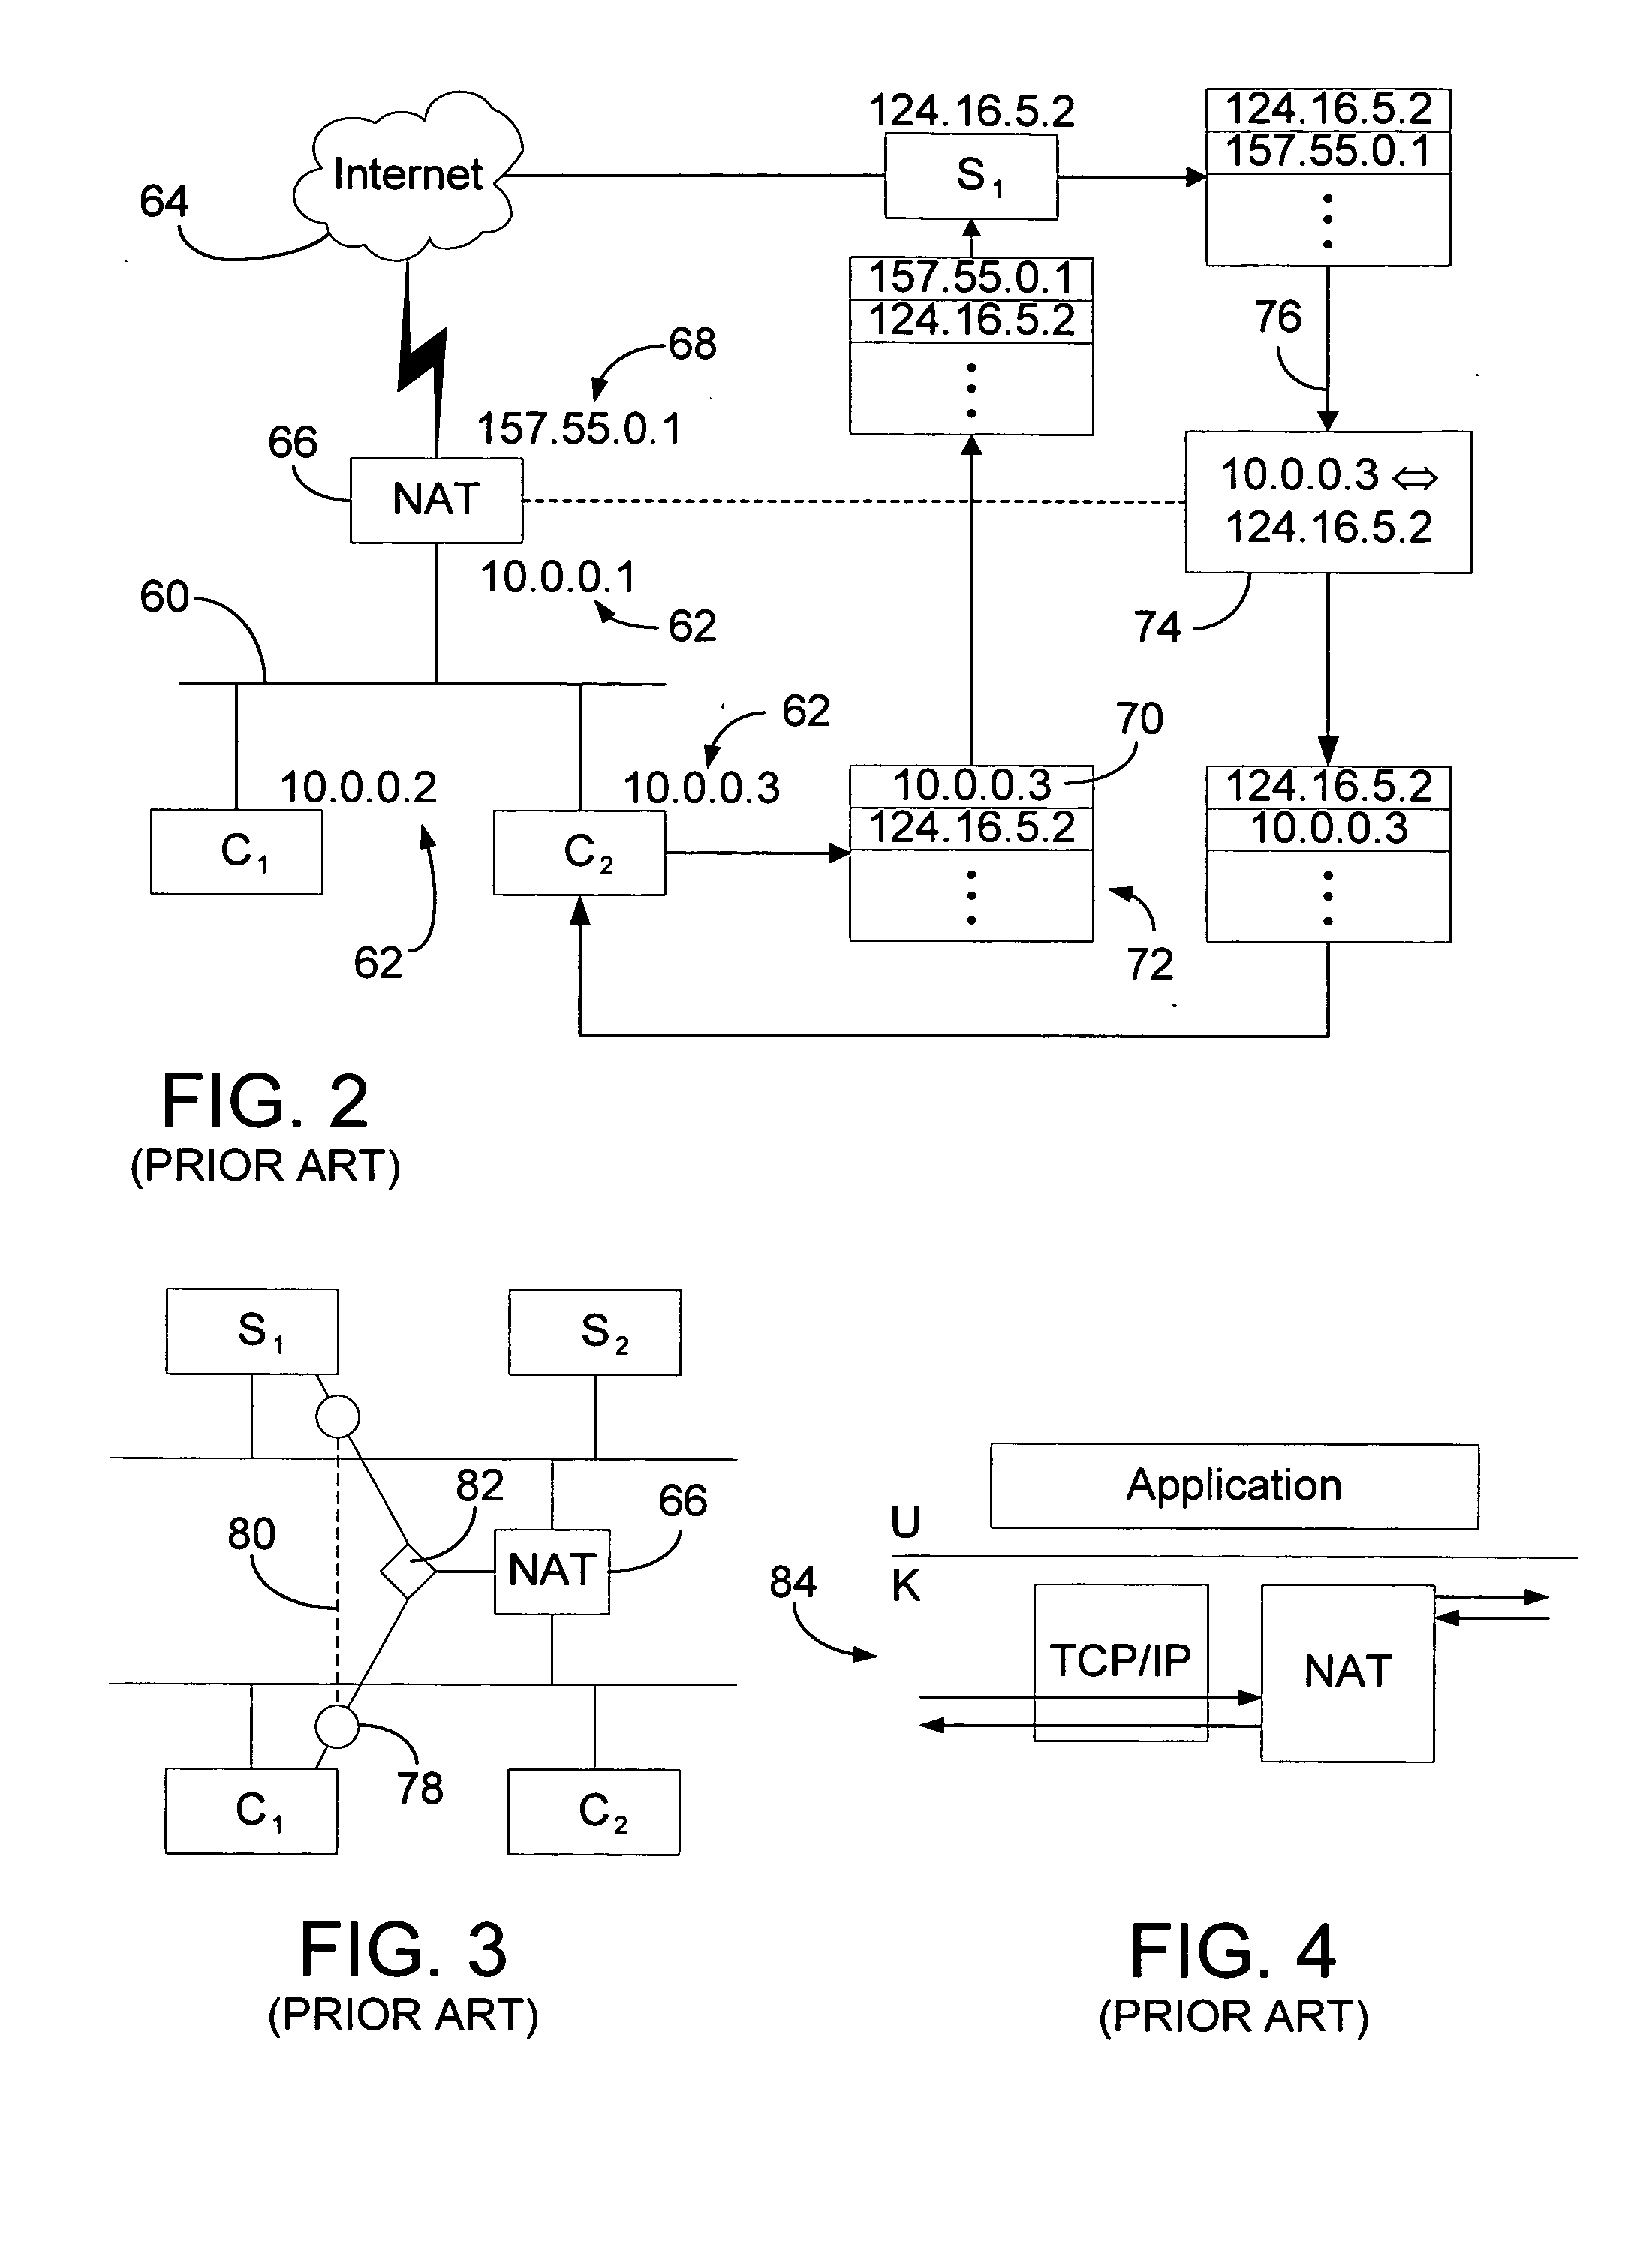 Method of operation of an intelligent transpartent gateway during an FTP session